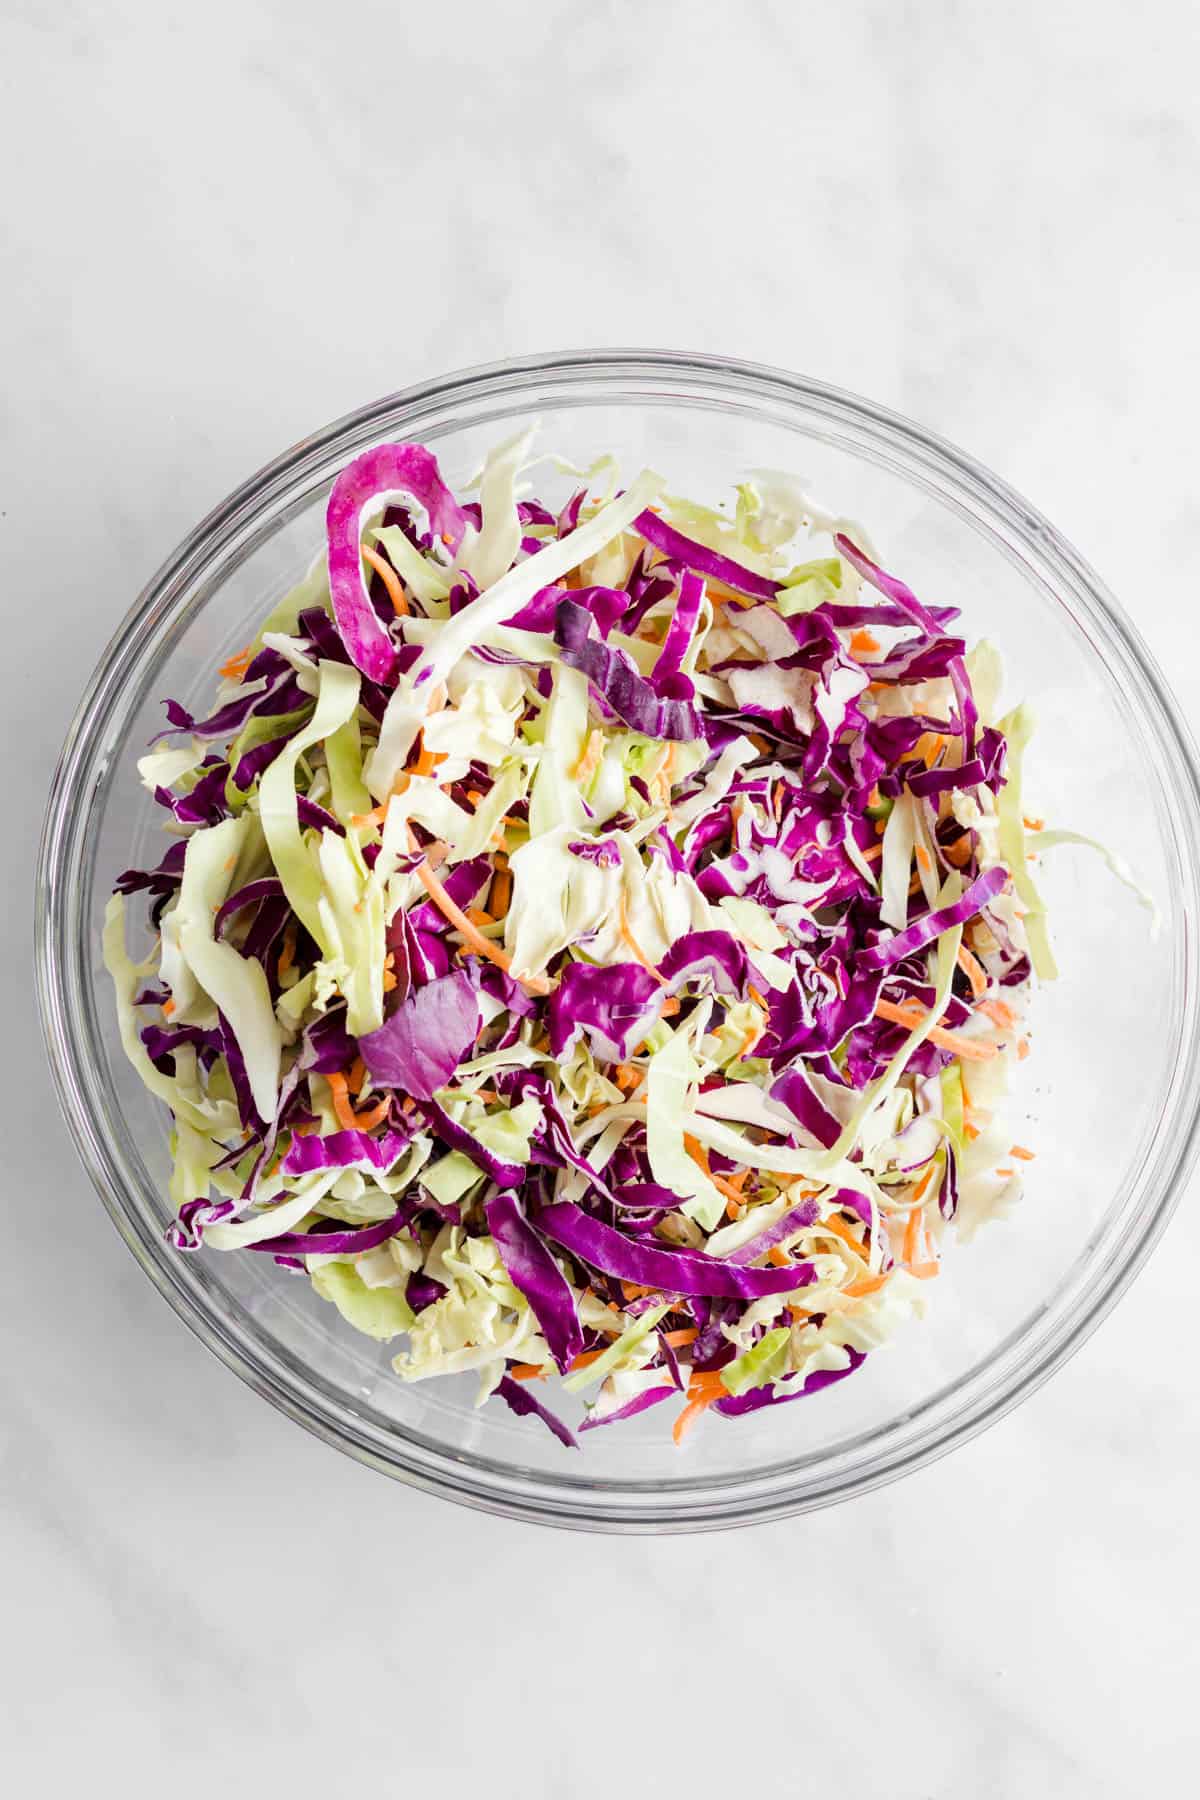 Shredded cabbage and carrots mix added into bowl with dressing.